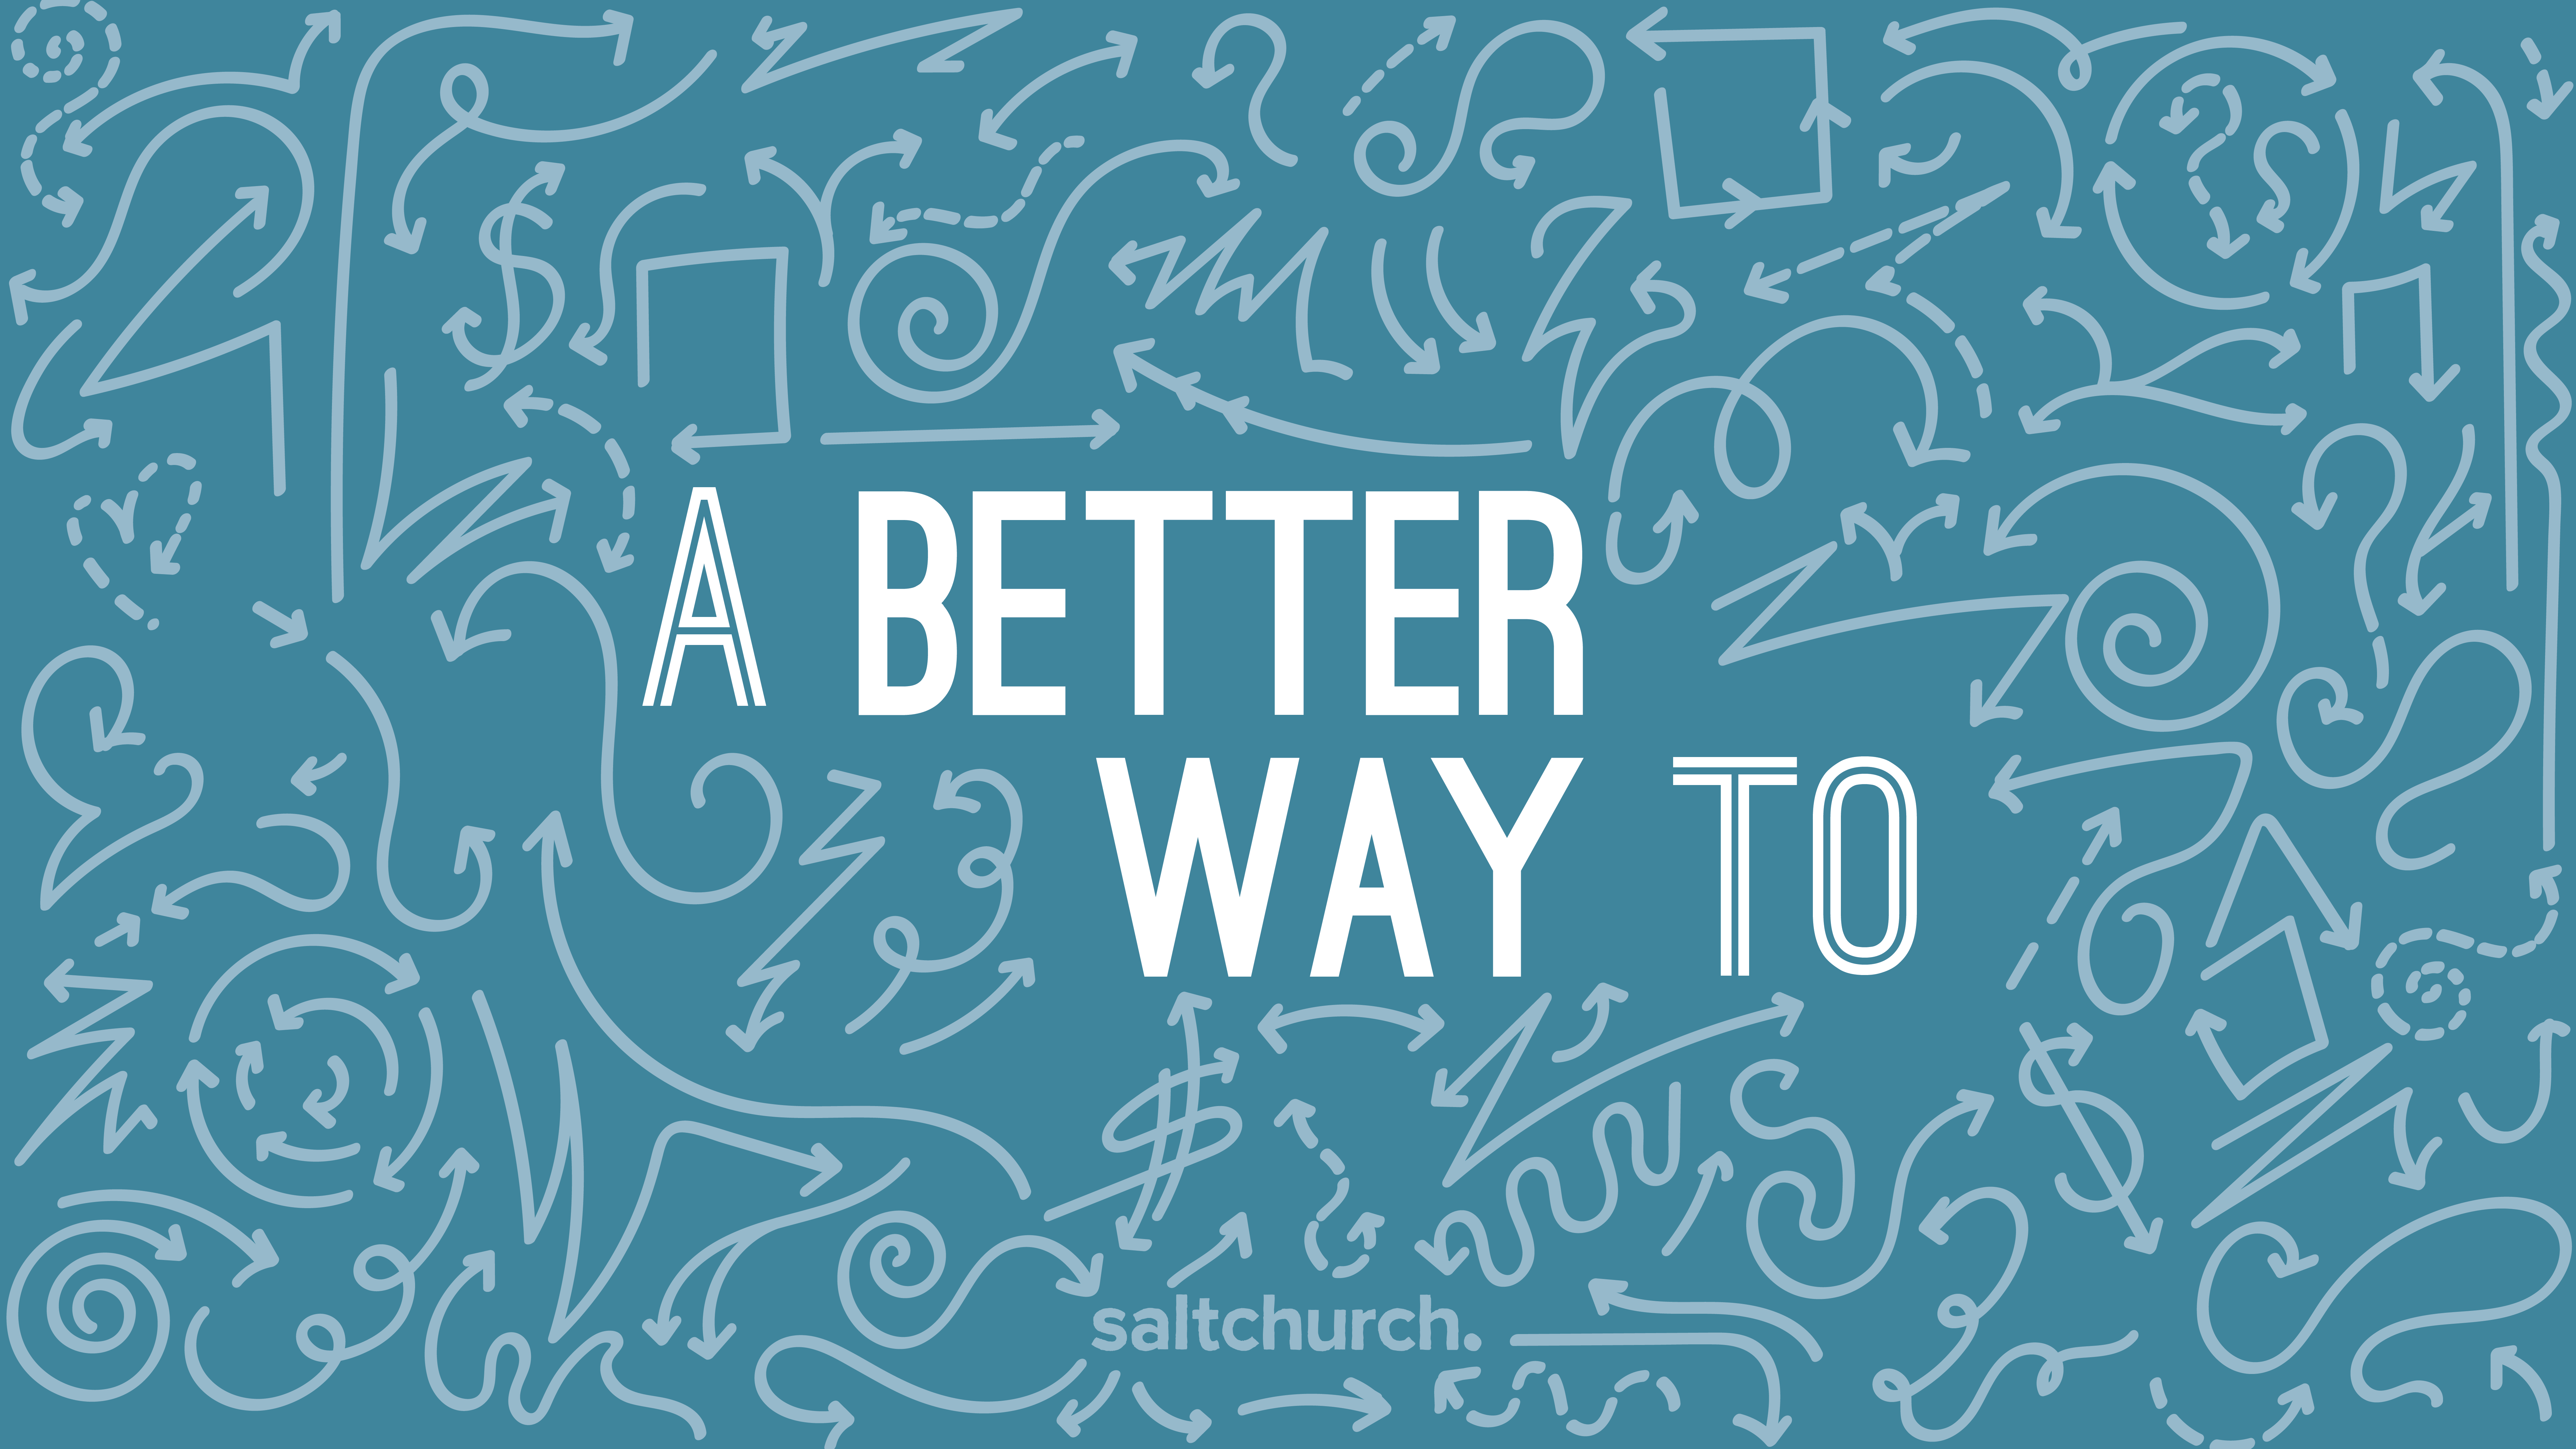 A better way to be mentally healthy (Matthew 6)